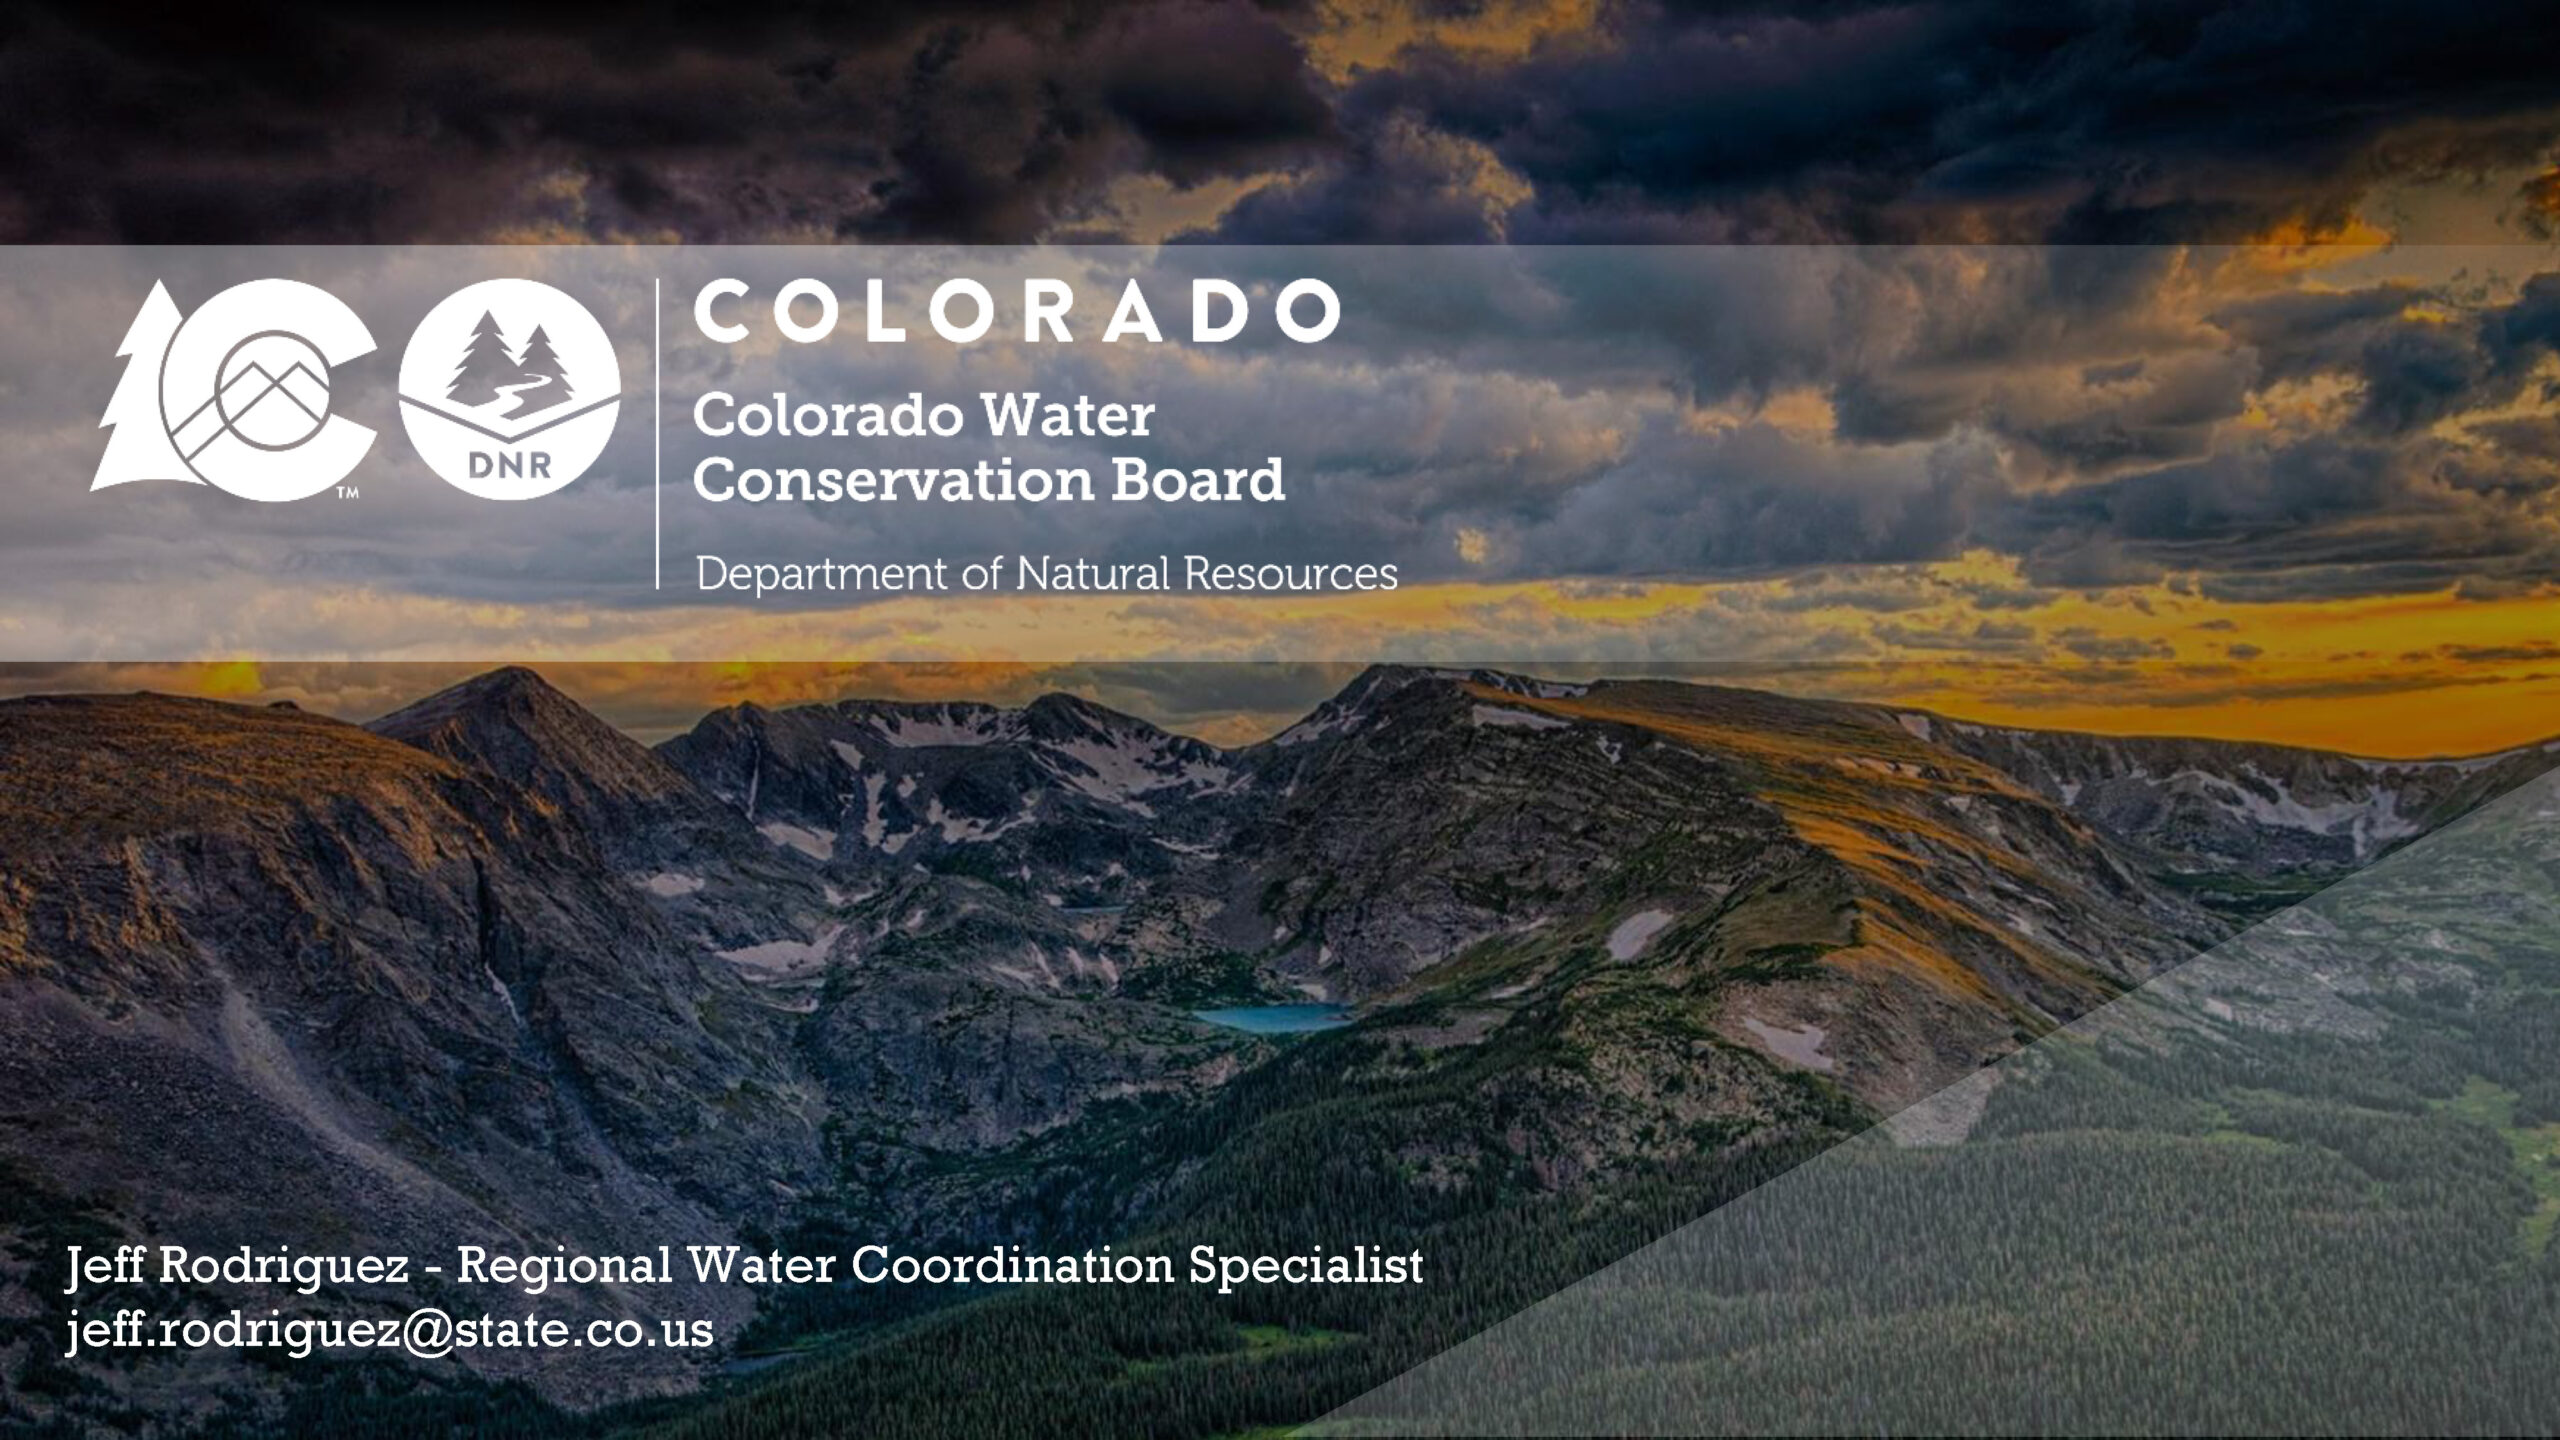 Colorado Water Conservation Board Intro Slide with Contact Information